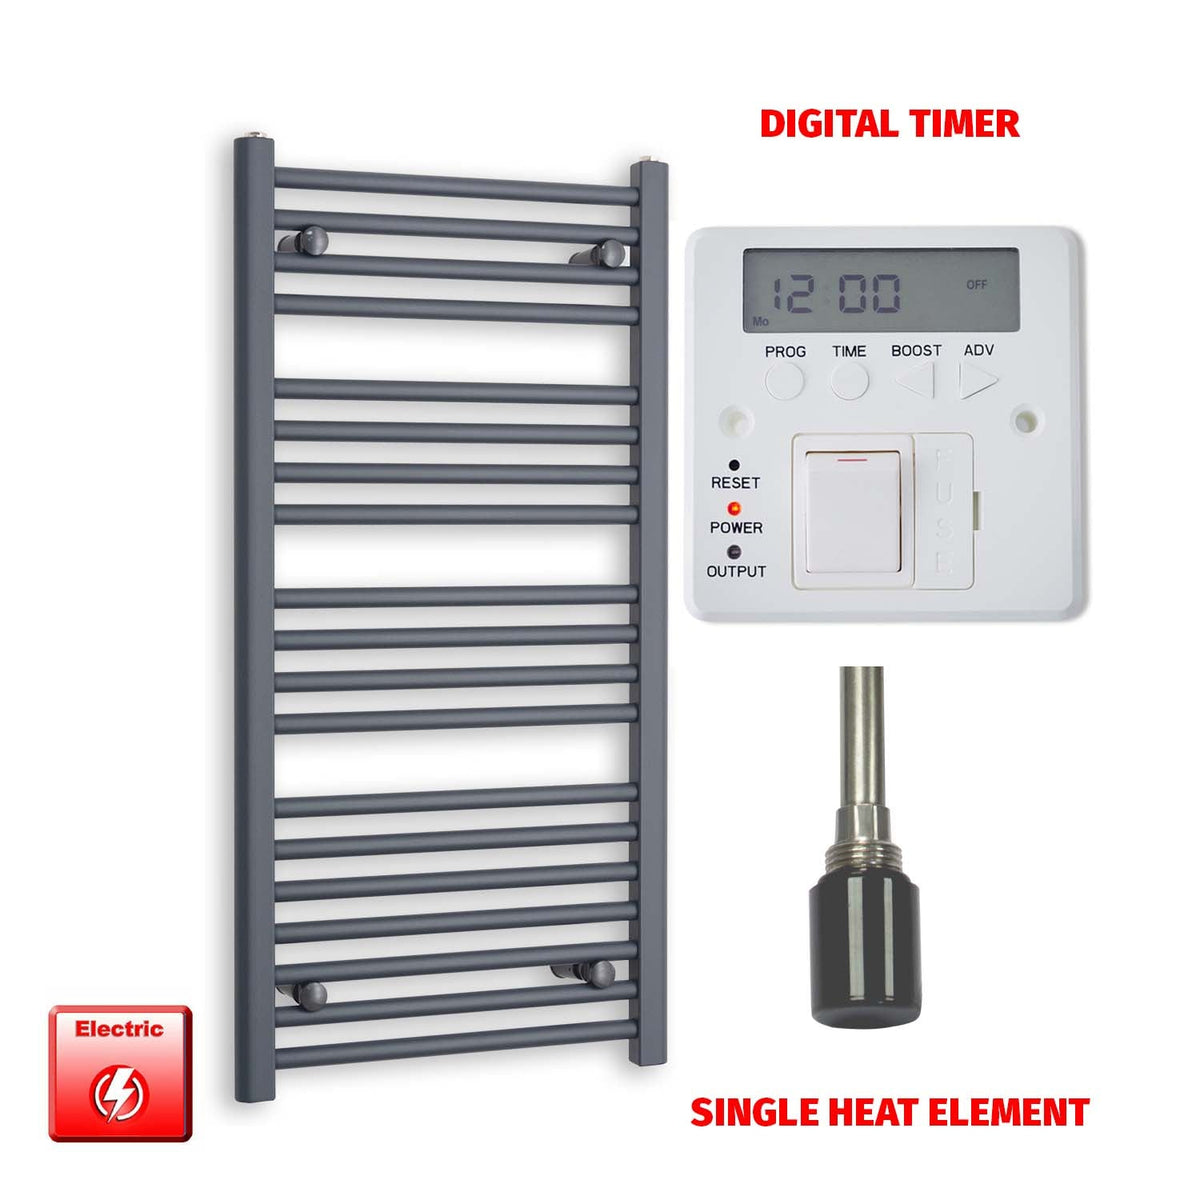 1000 x 500 Flat Anthracite Pre-Filled Electric Heated Towel Radiator Single heat element Digtal timer